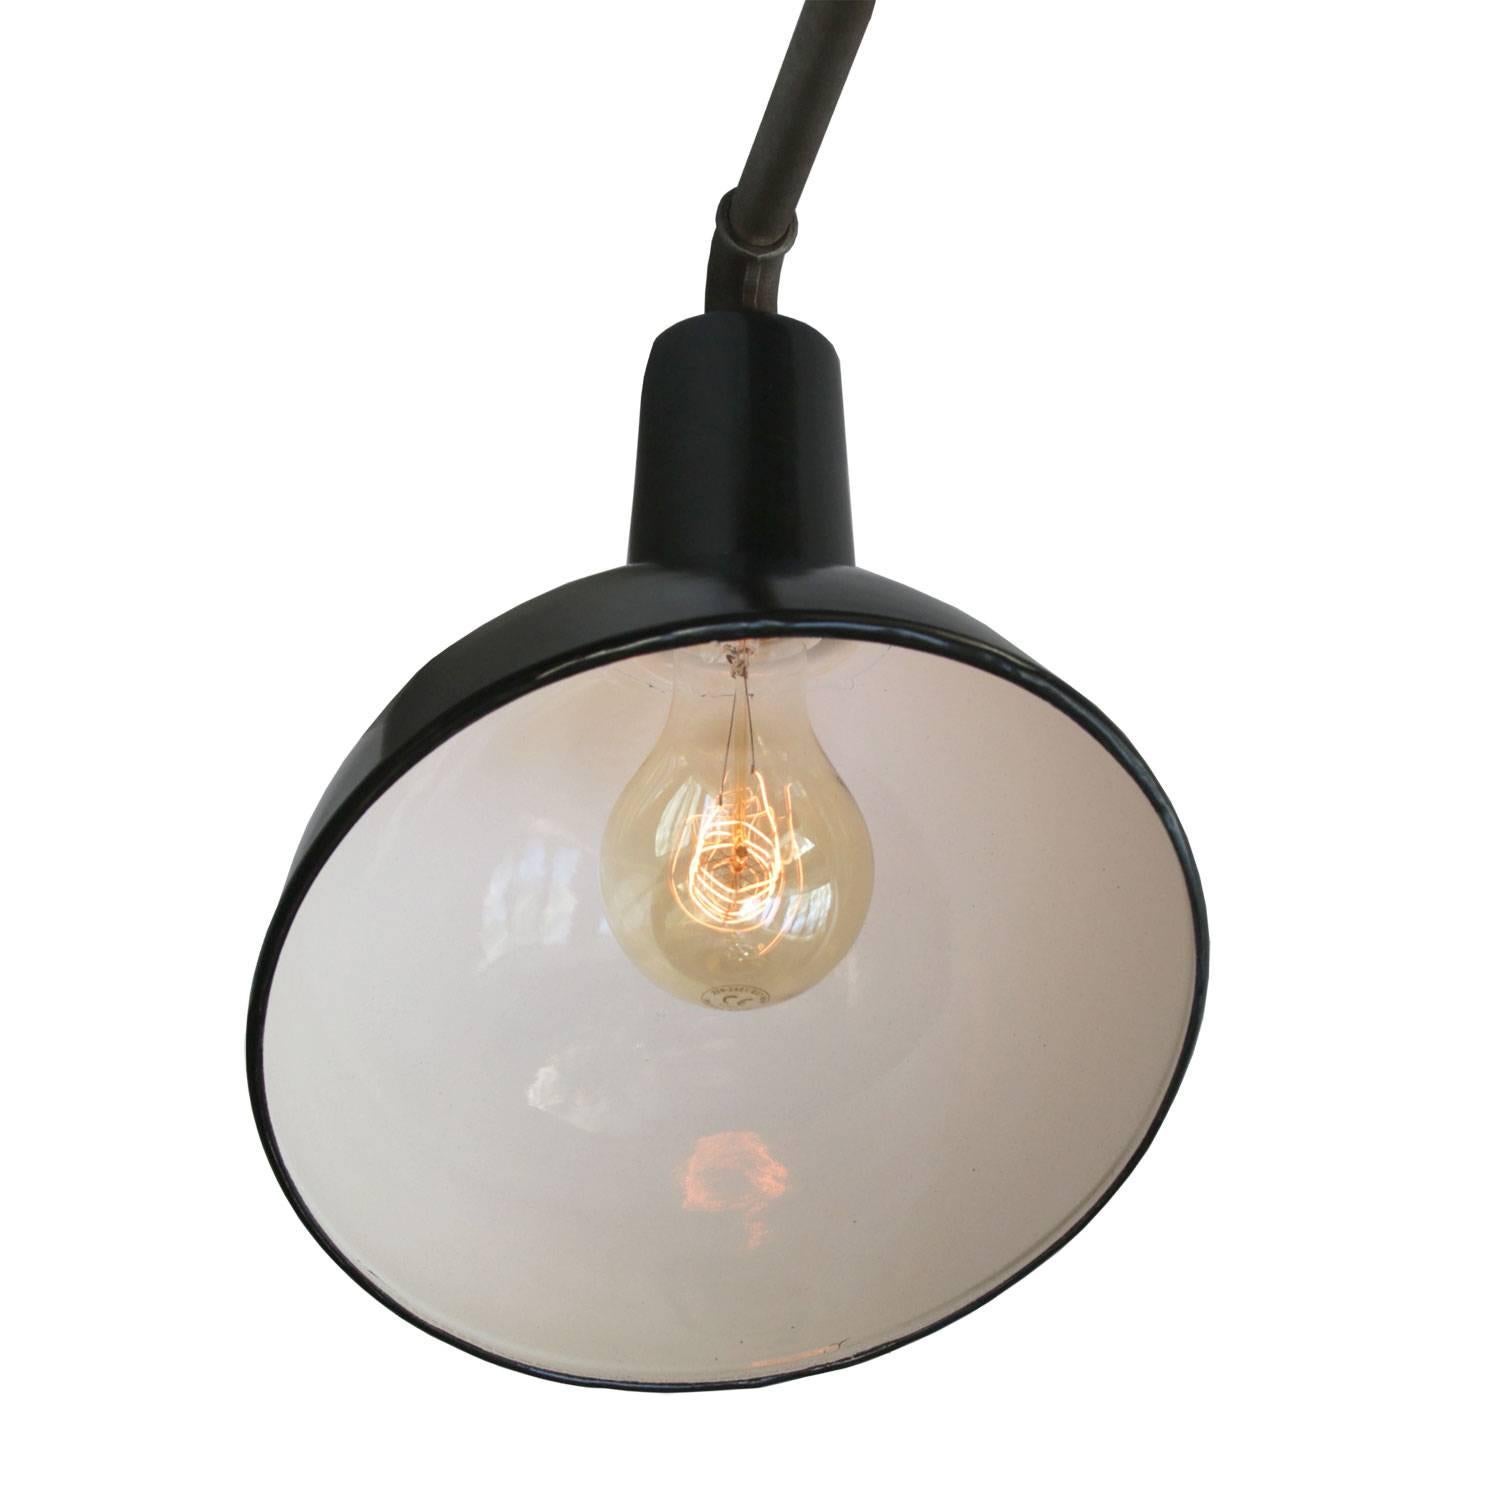 Factory wall light. Black enamel. White interior. Measures: Diameter cast iron wall piece 12 cm, 3 holes to secure.

Weight: 2.9 kg / 6.4 lb

Priced individual item. All lamps have been made suitable by international standards for incandescent light